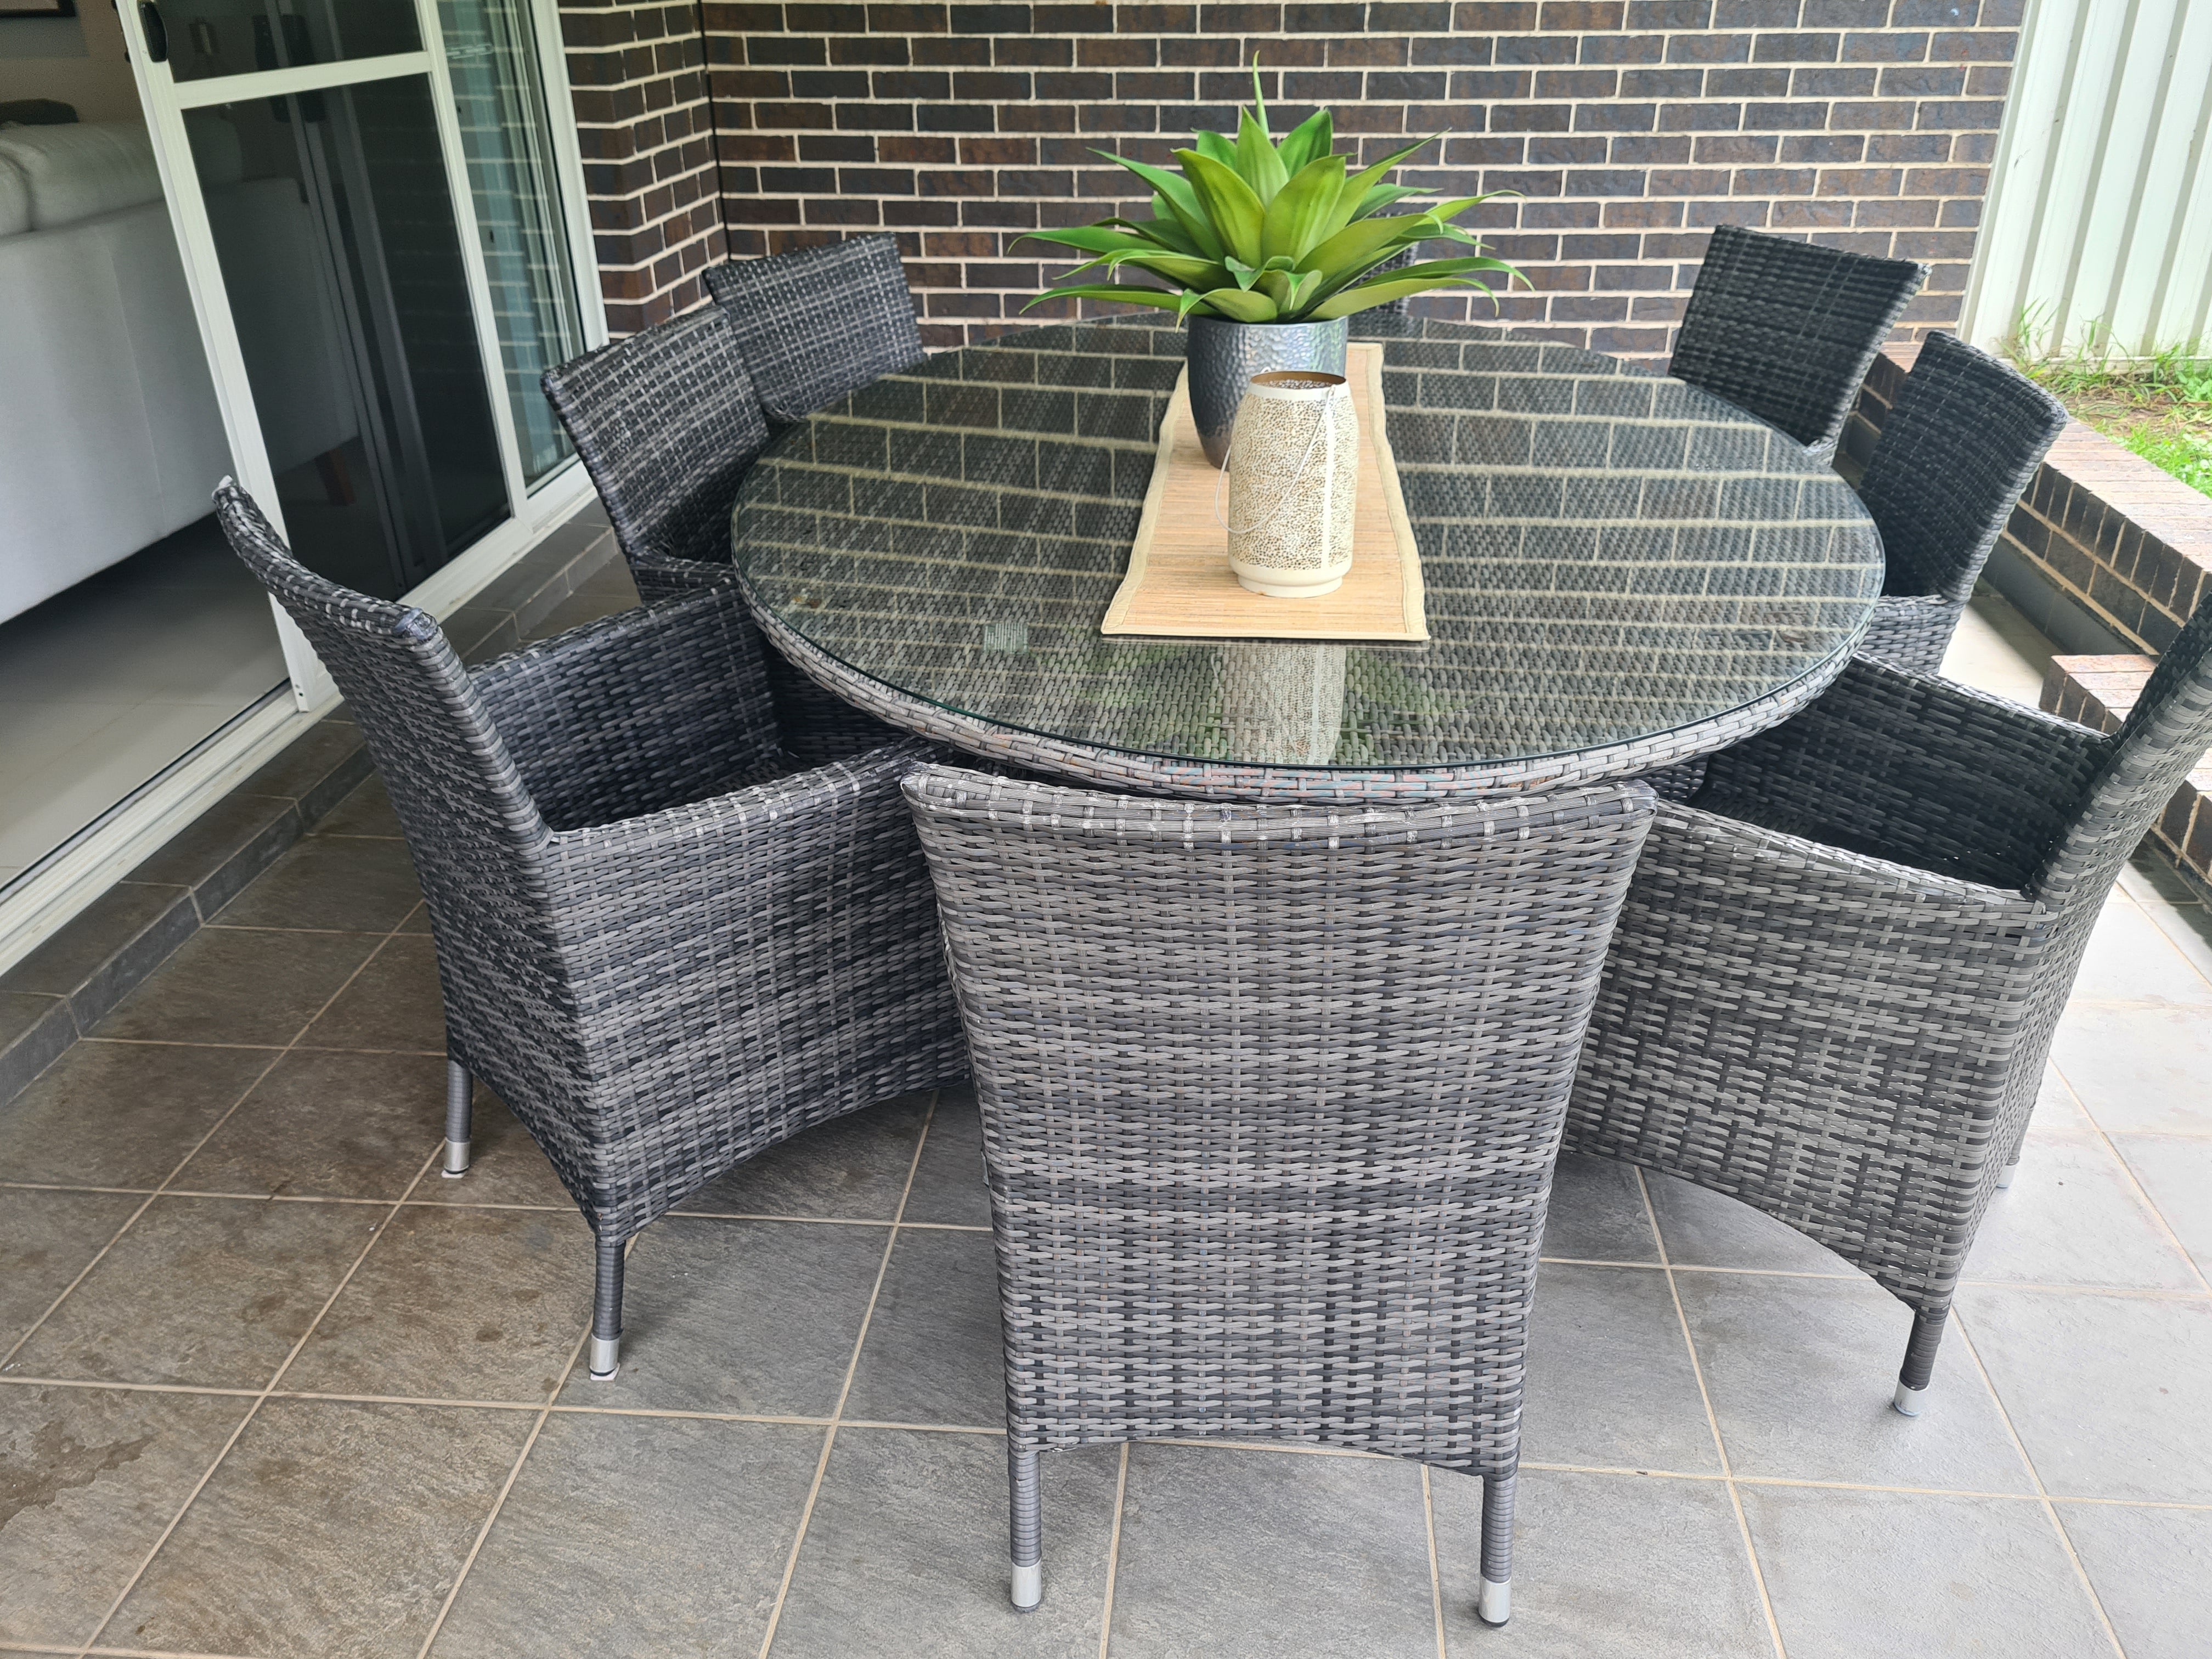 8 Seater Charcoal Rattan Outdoor Dining Set - $50 / week (6 week hire)